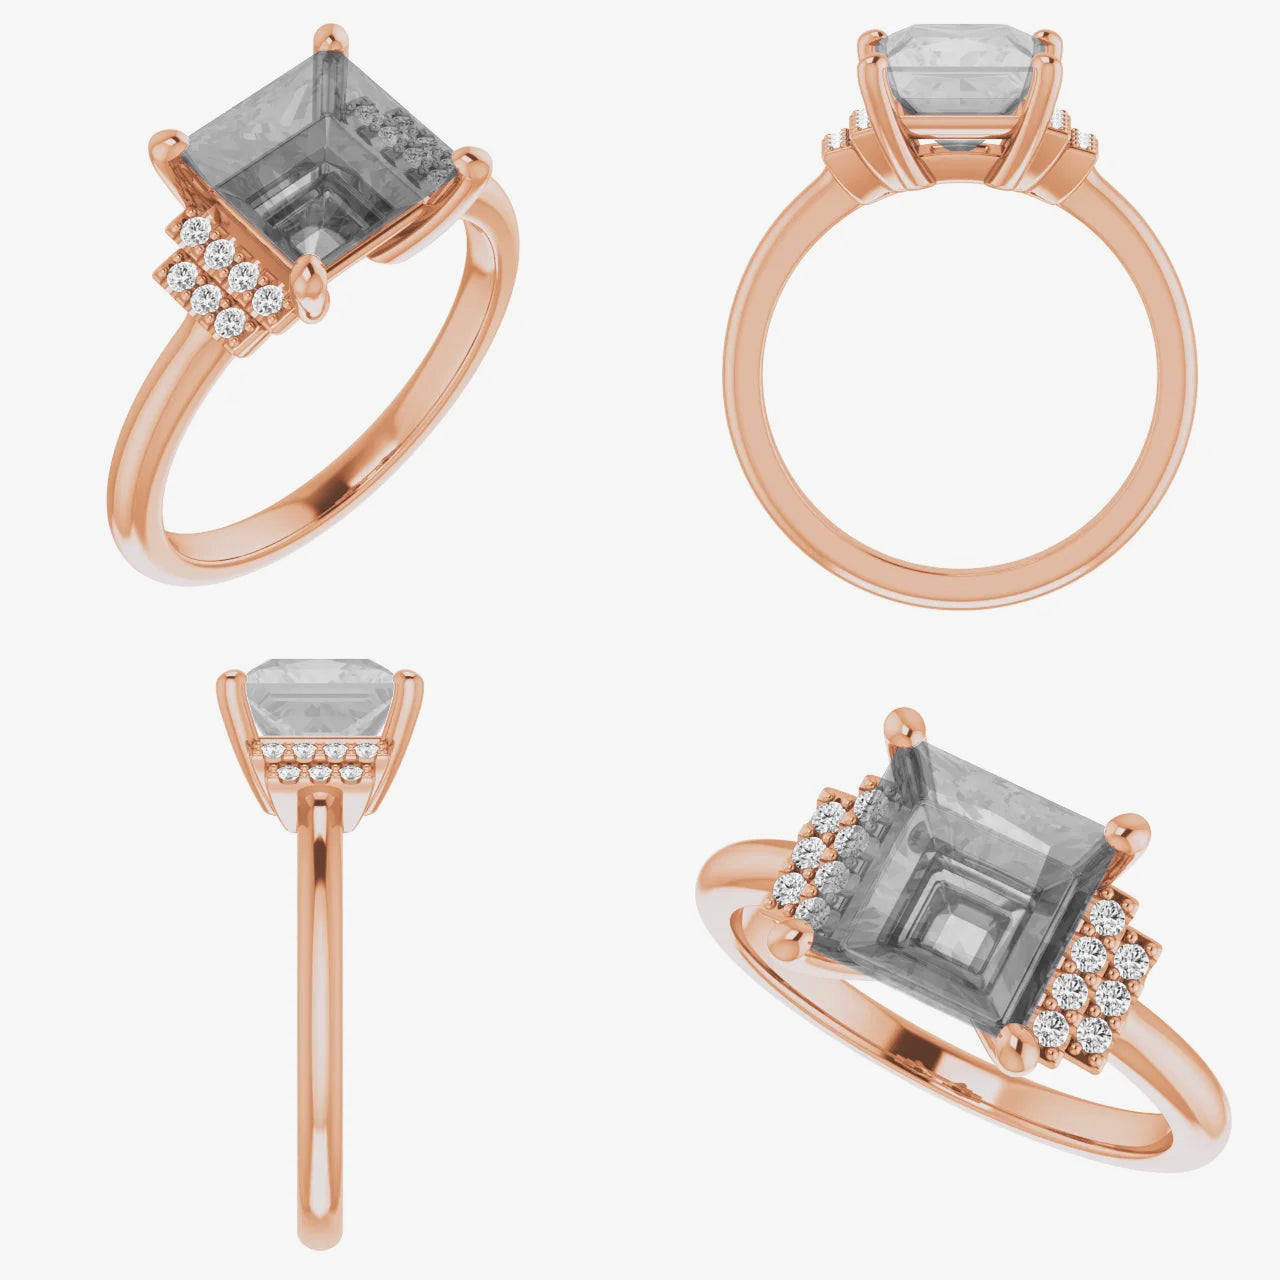 Isabella Setting - Midwinter Co. Alternative Bridal Rings and Modern Fine Jewelry